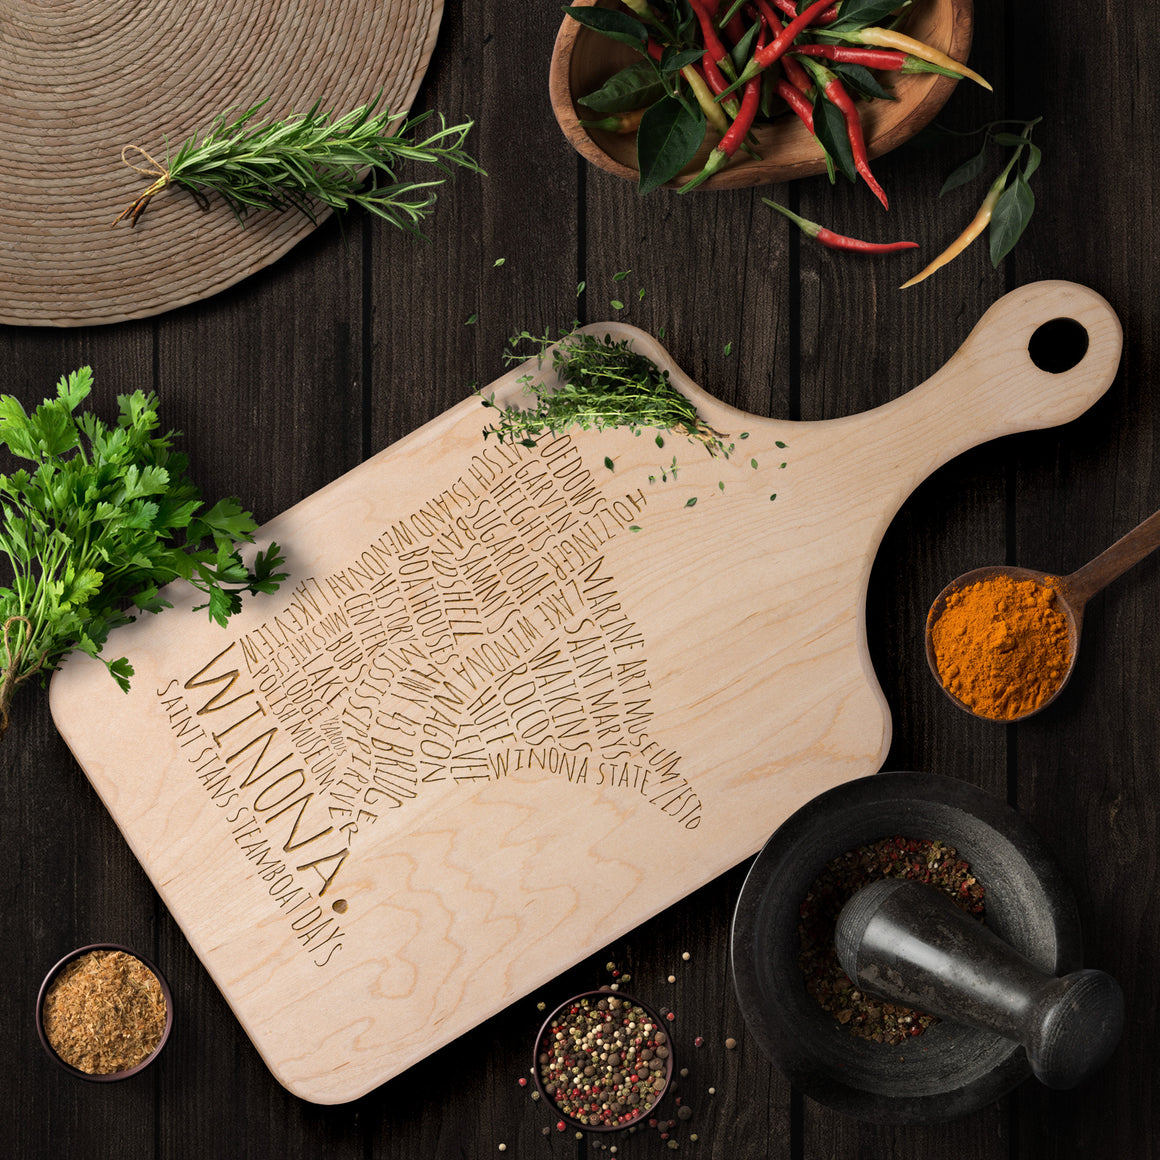 Winona Minnesota Cutting Board with Handle, Typography Map, Maple